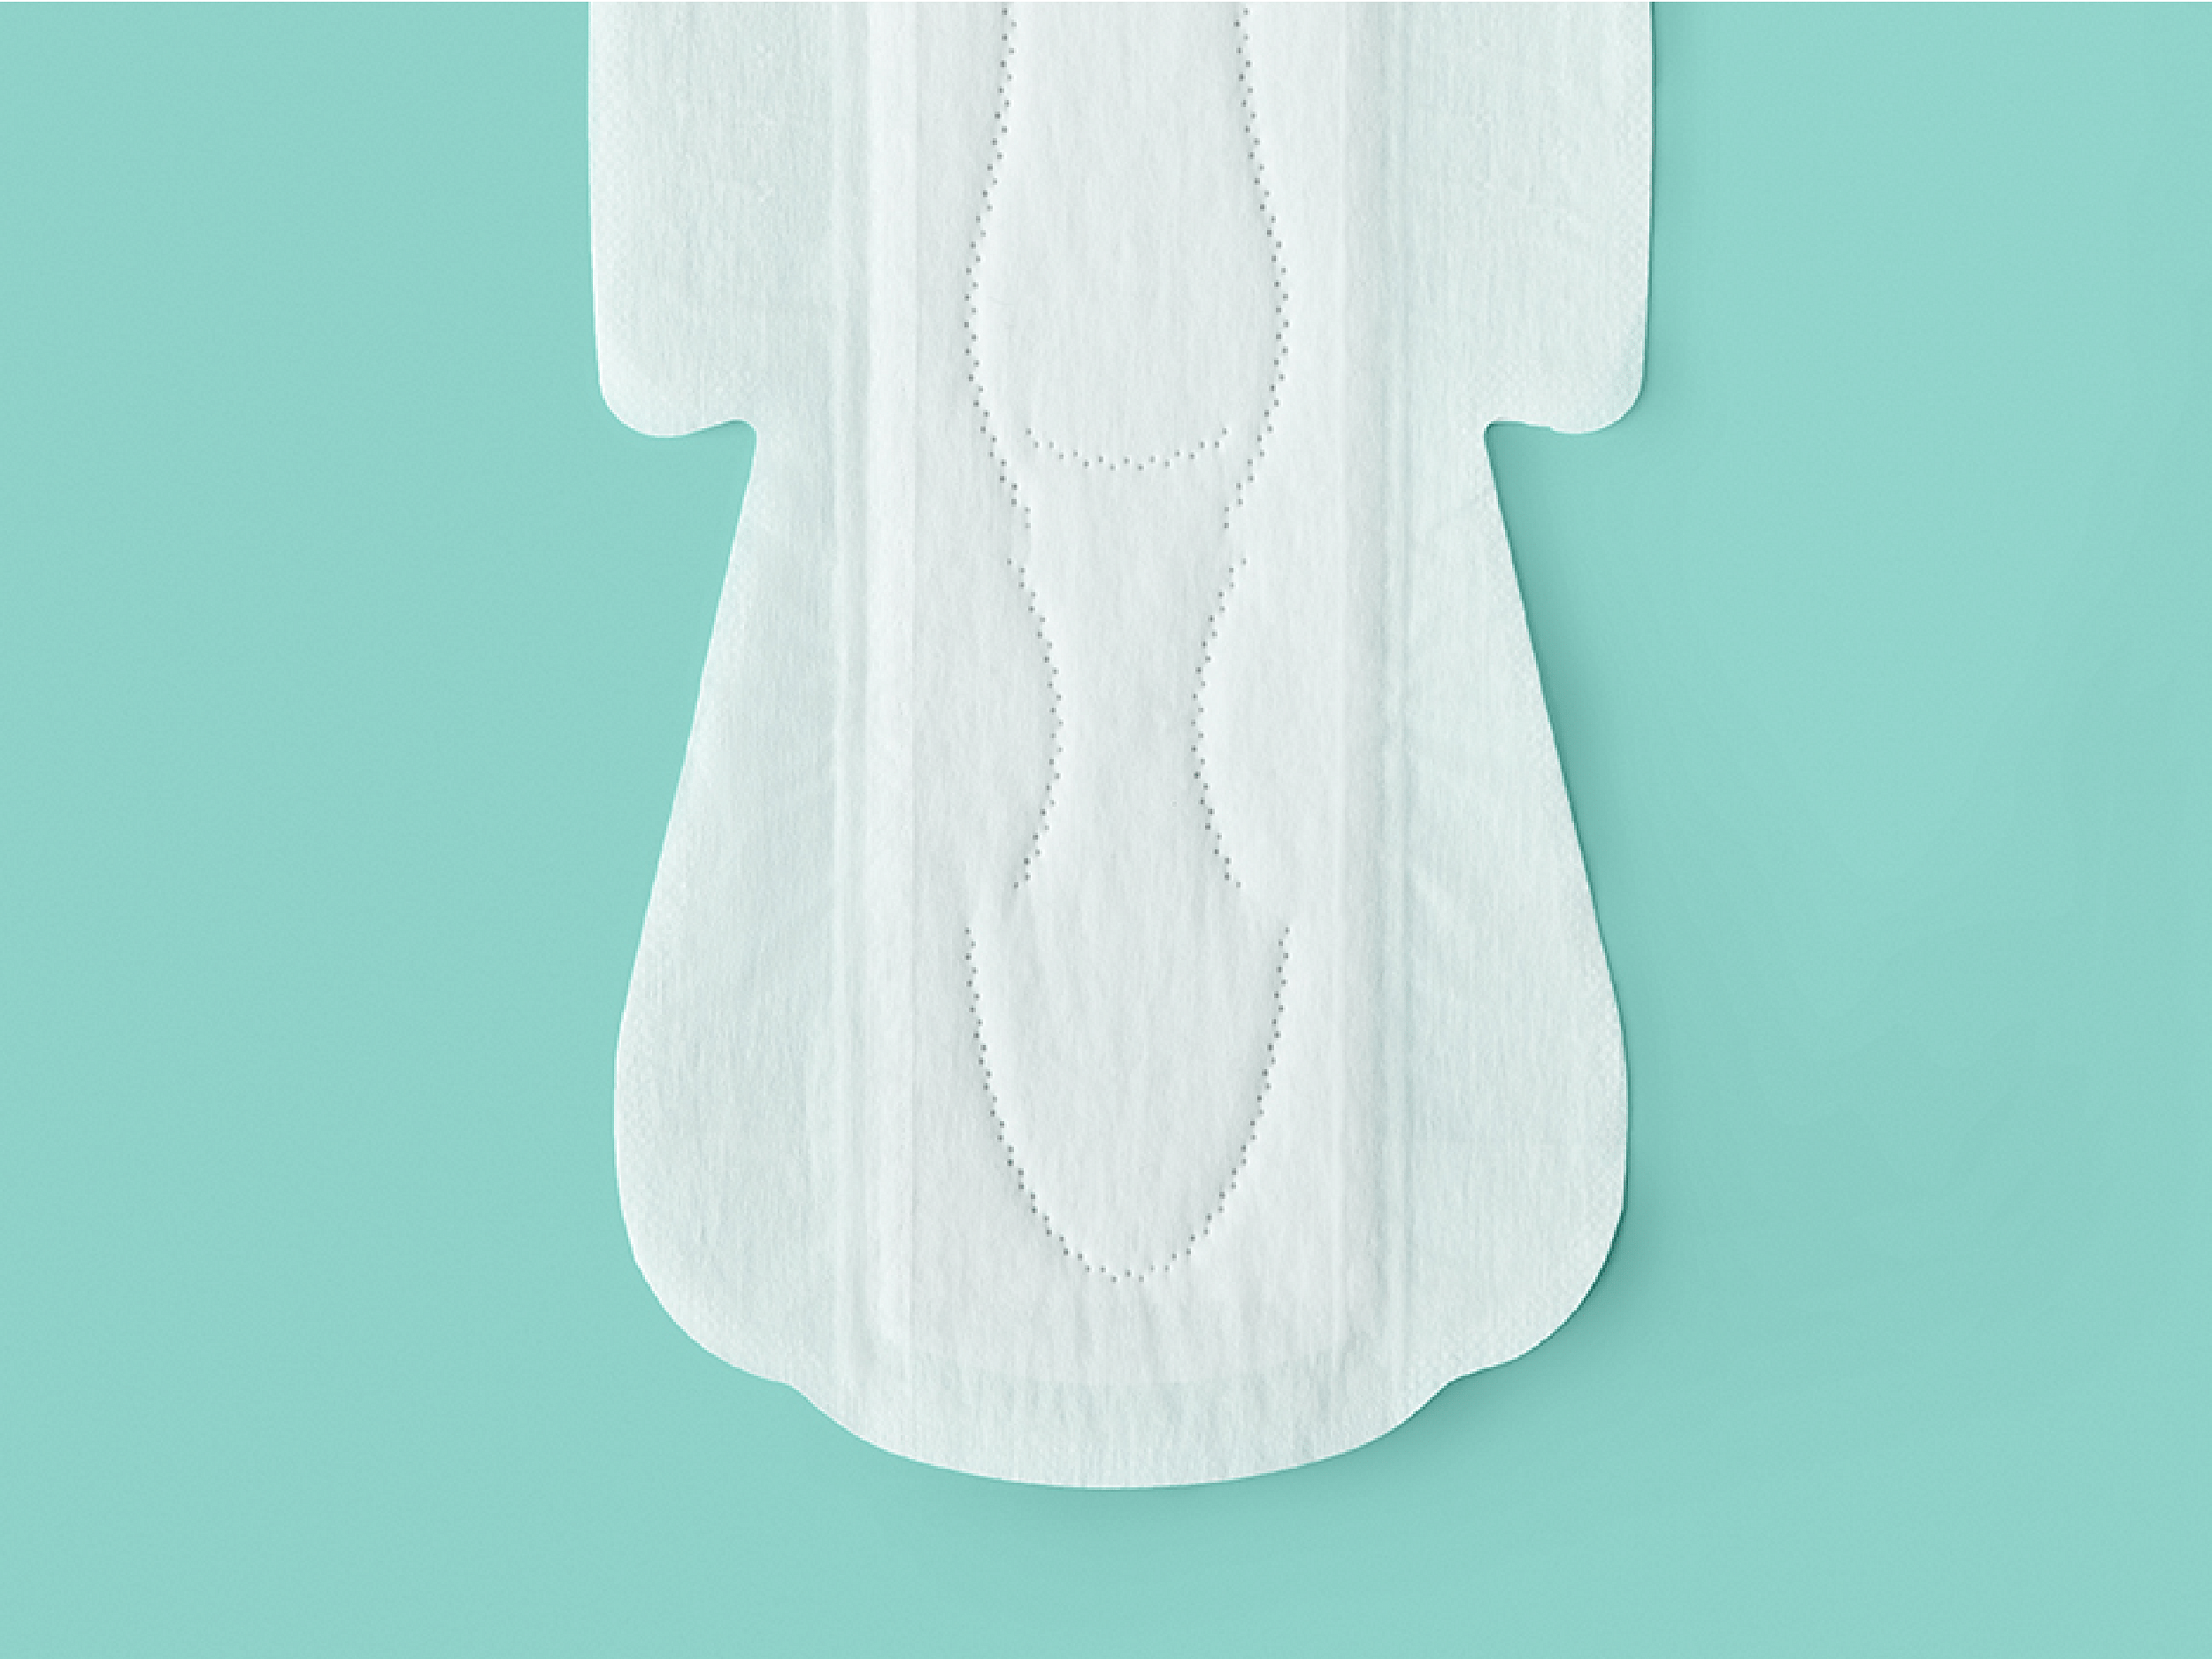 Pads can help prevent leakage on your period